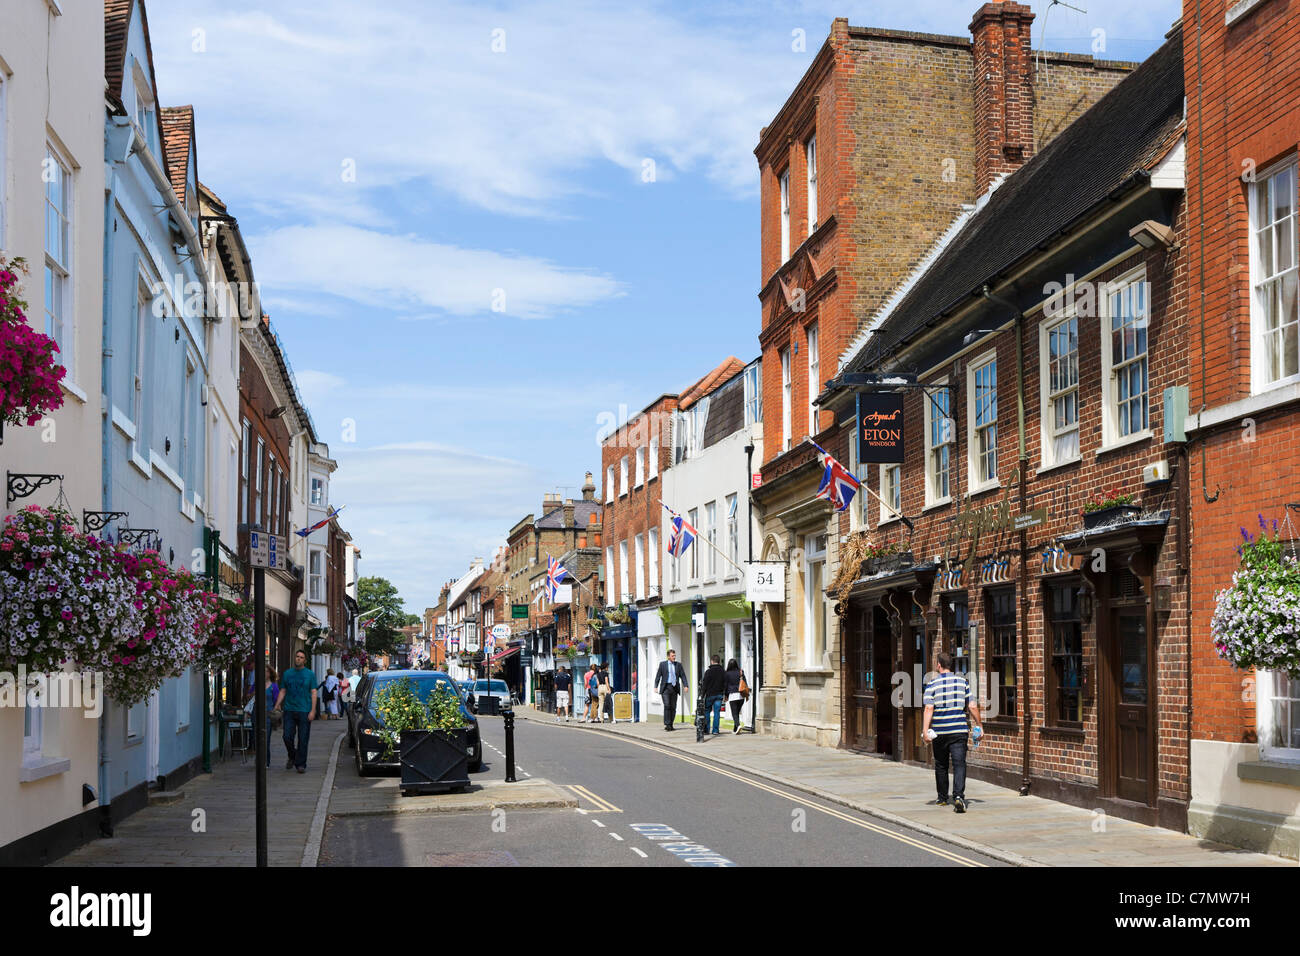 Shops on the High Street in the town centre, Eton, Berkshire, England, UK Stock Photo